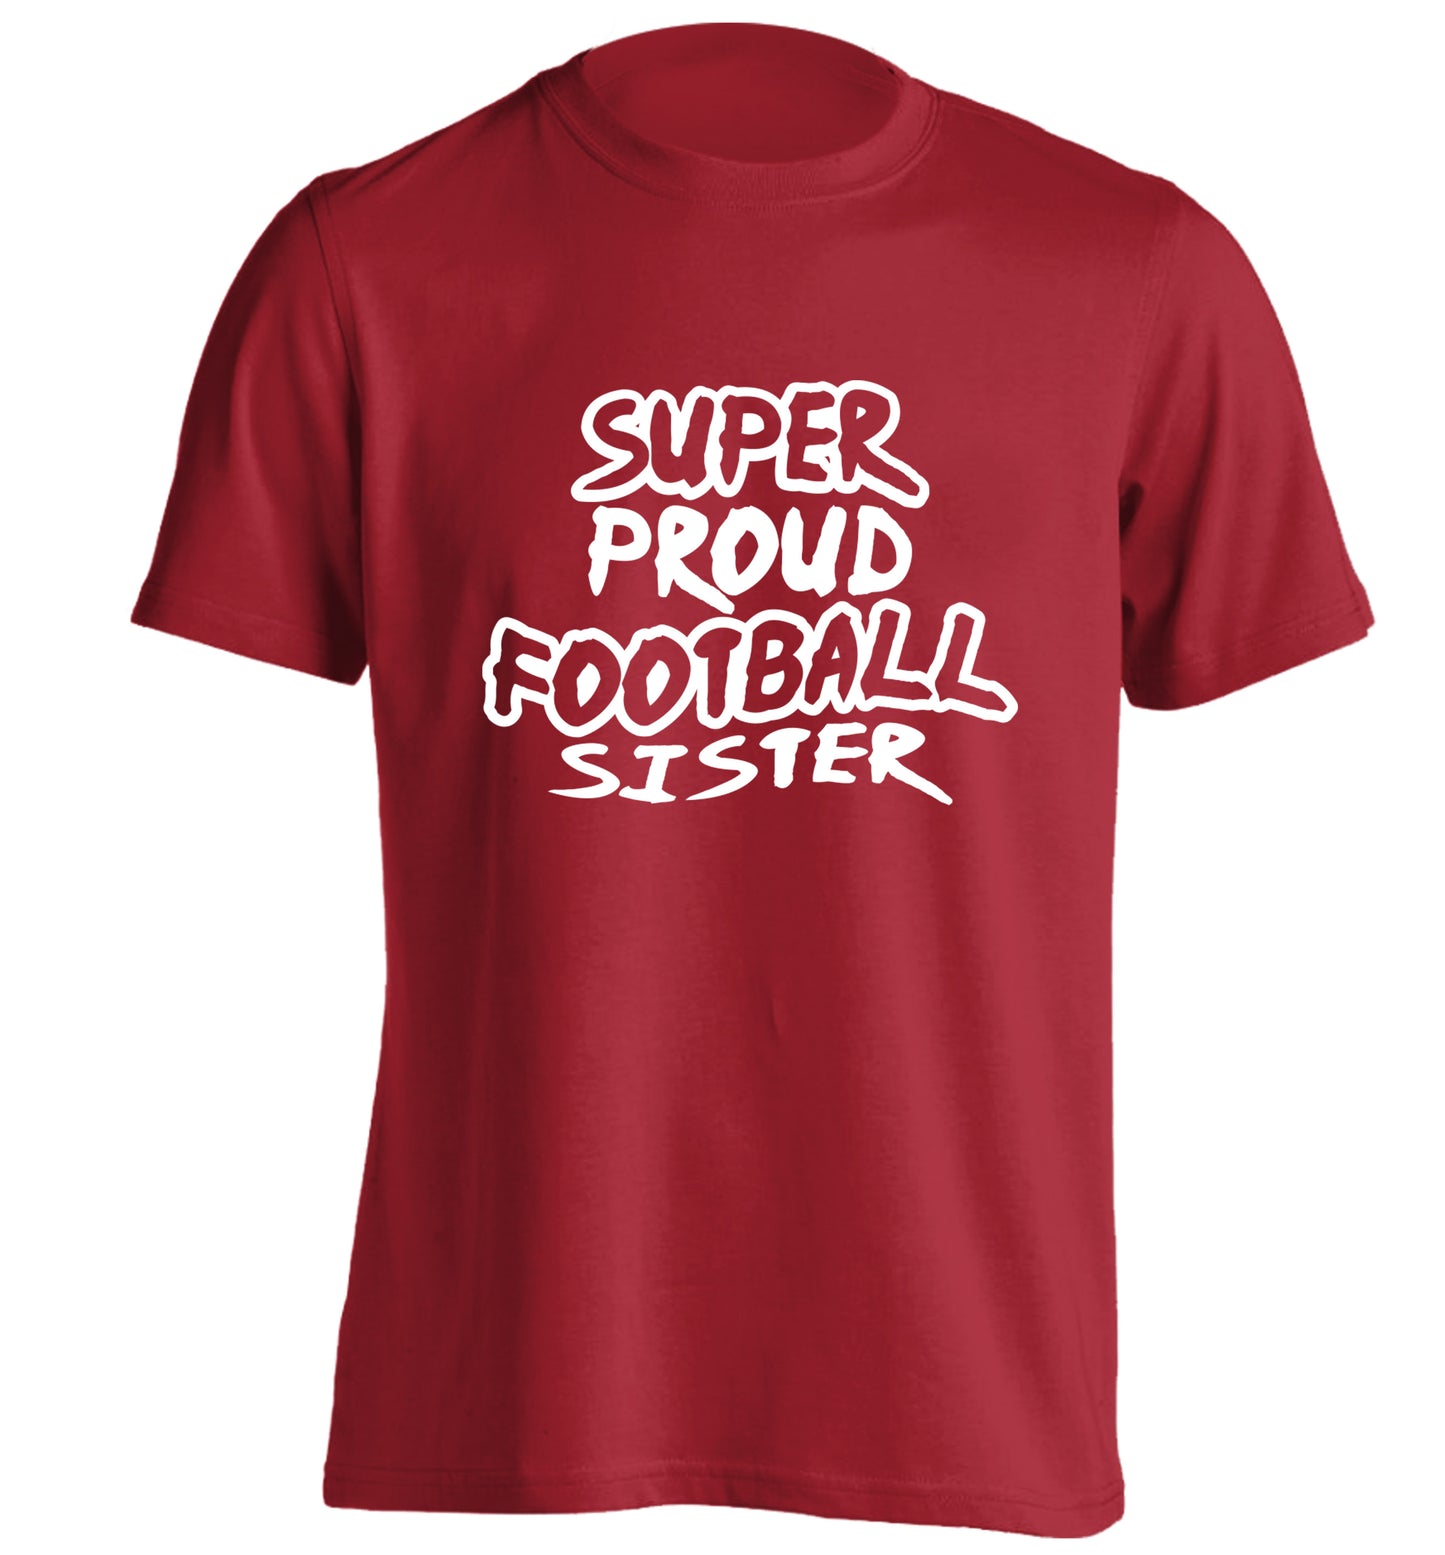 Super proud football sister adults unisexred Tshirt 2XL